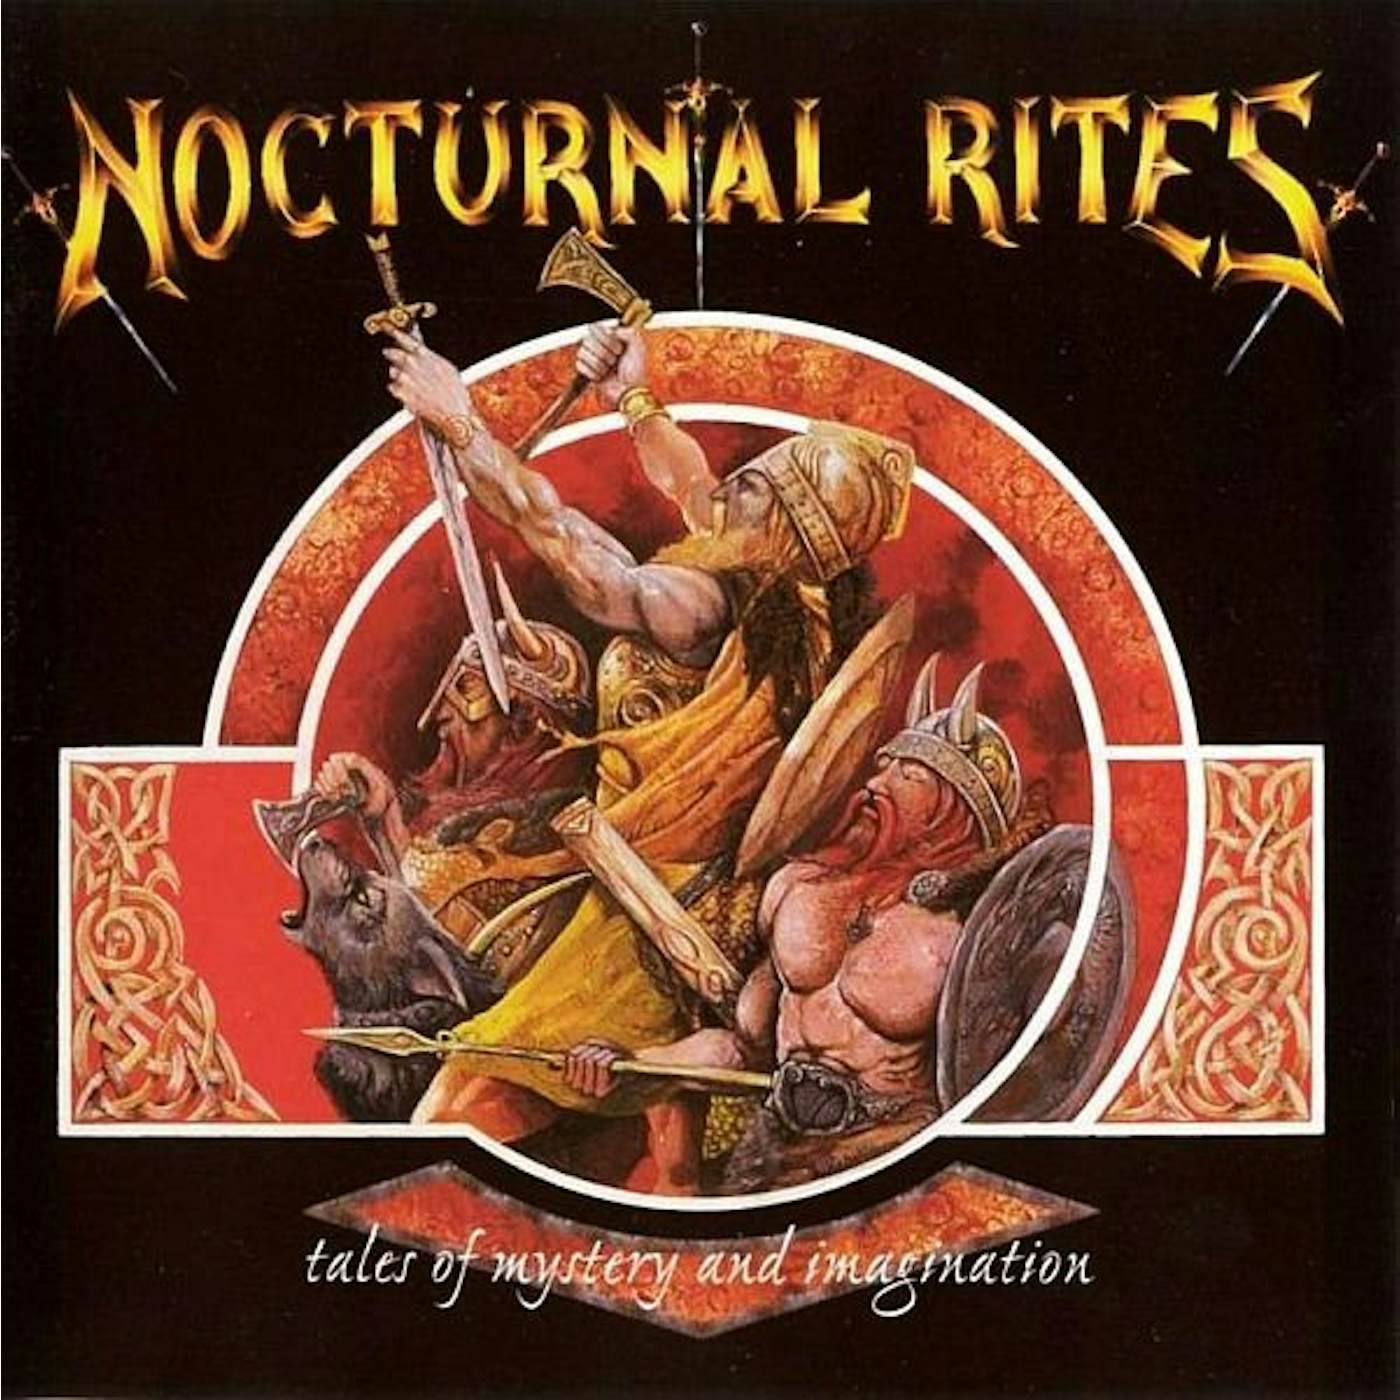 Nocturnal Rites Tales of Mystery and Imagination Vinyl Record